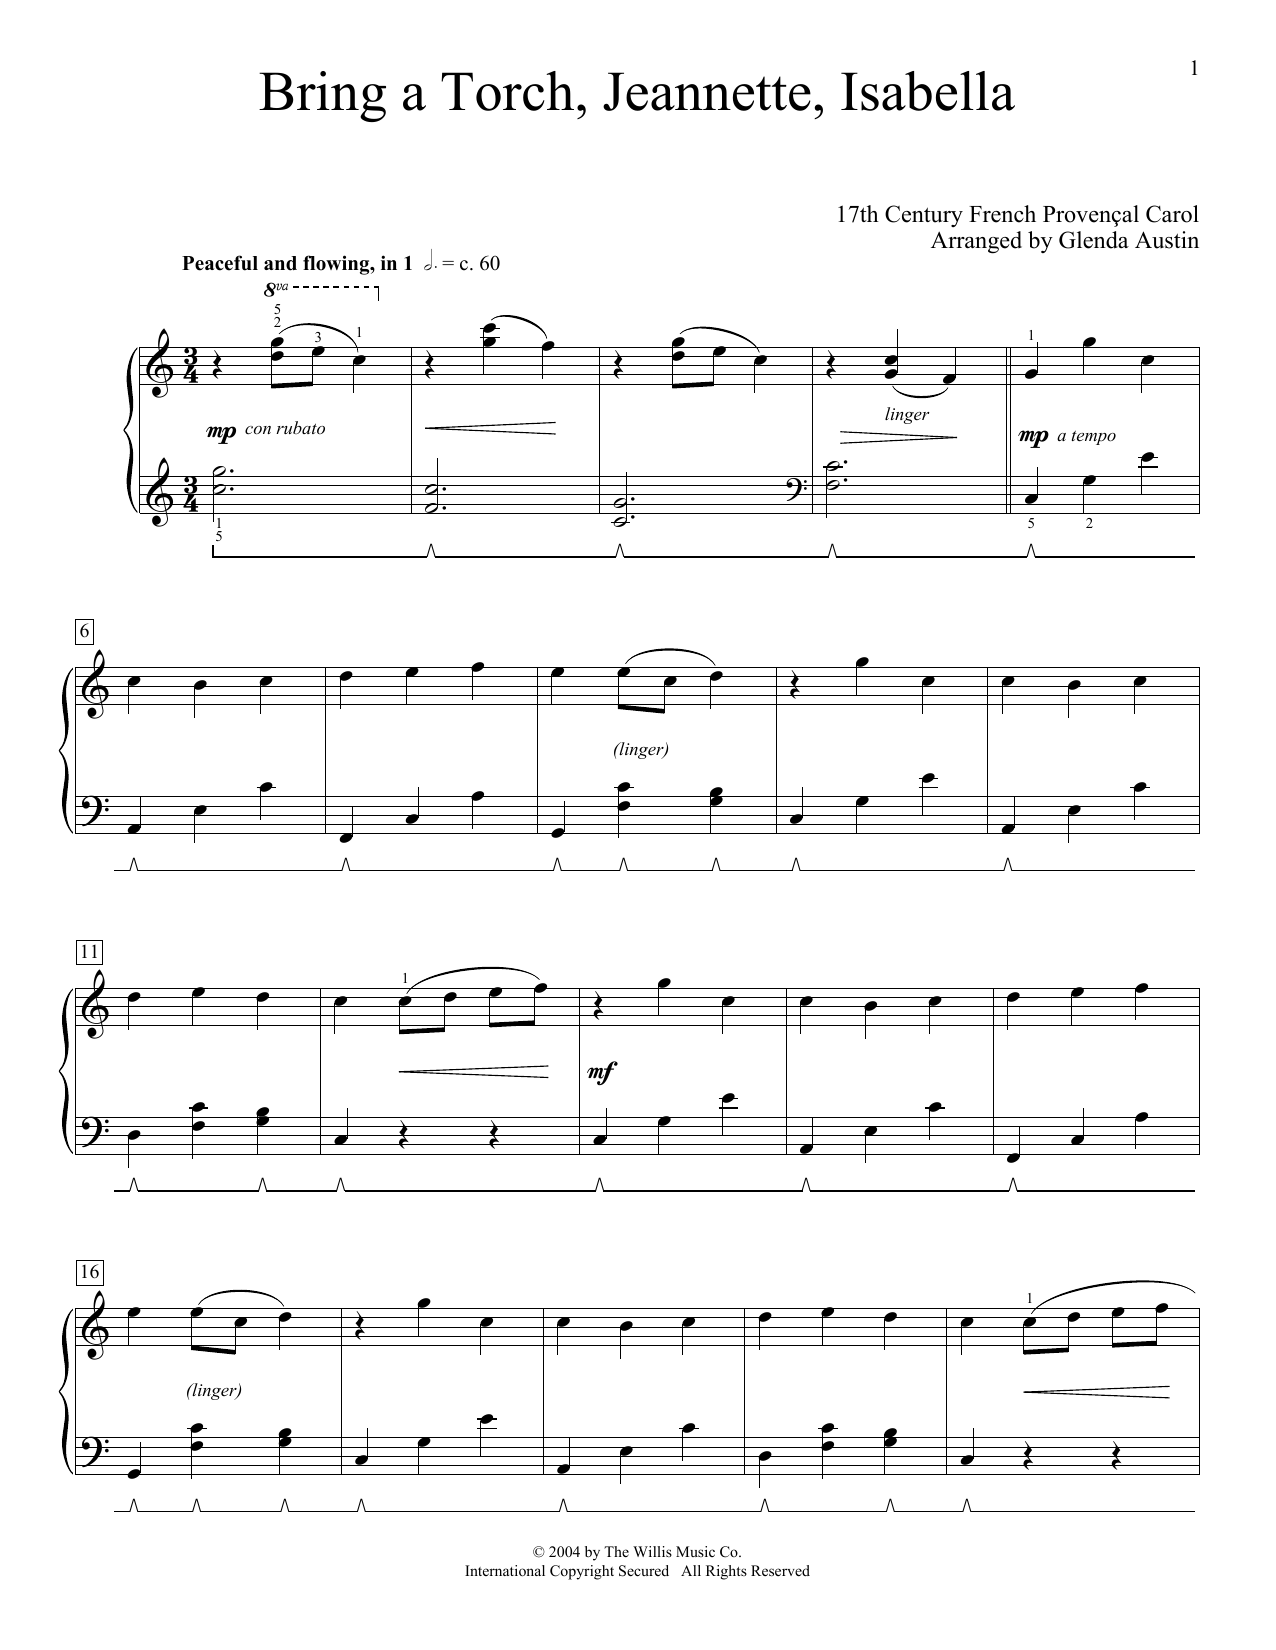 Download 17th Century French Carol Bring A Torch, Jeannette, Isabella (arr Sheet Music